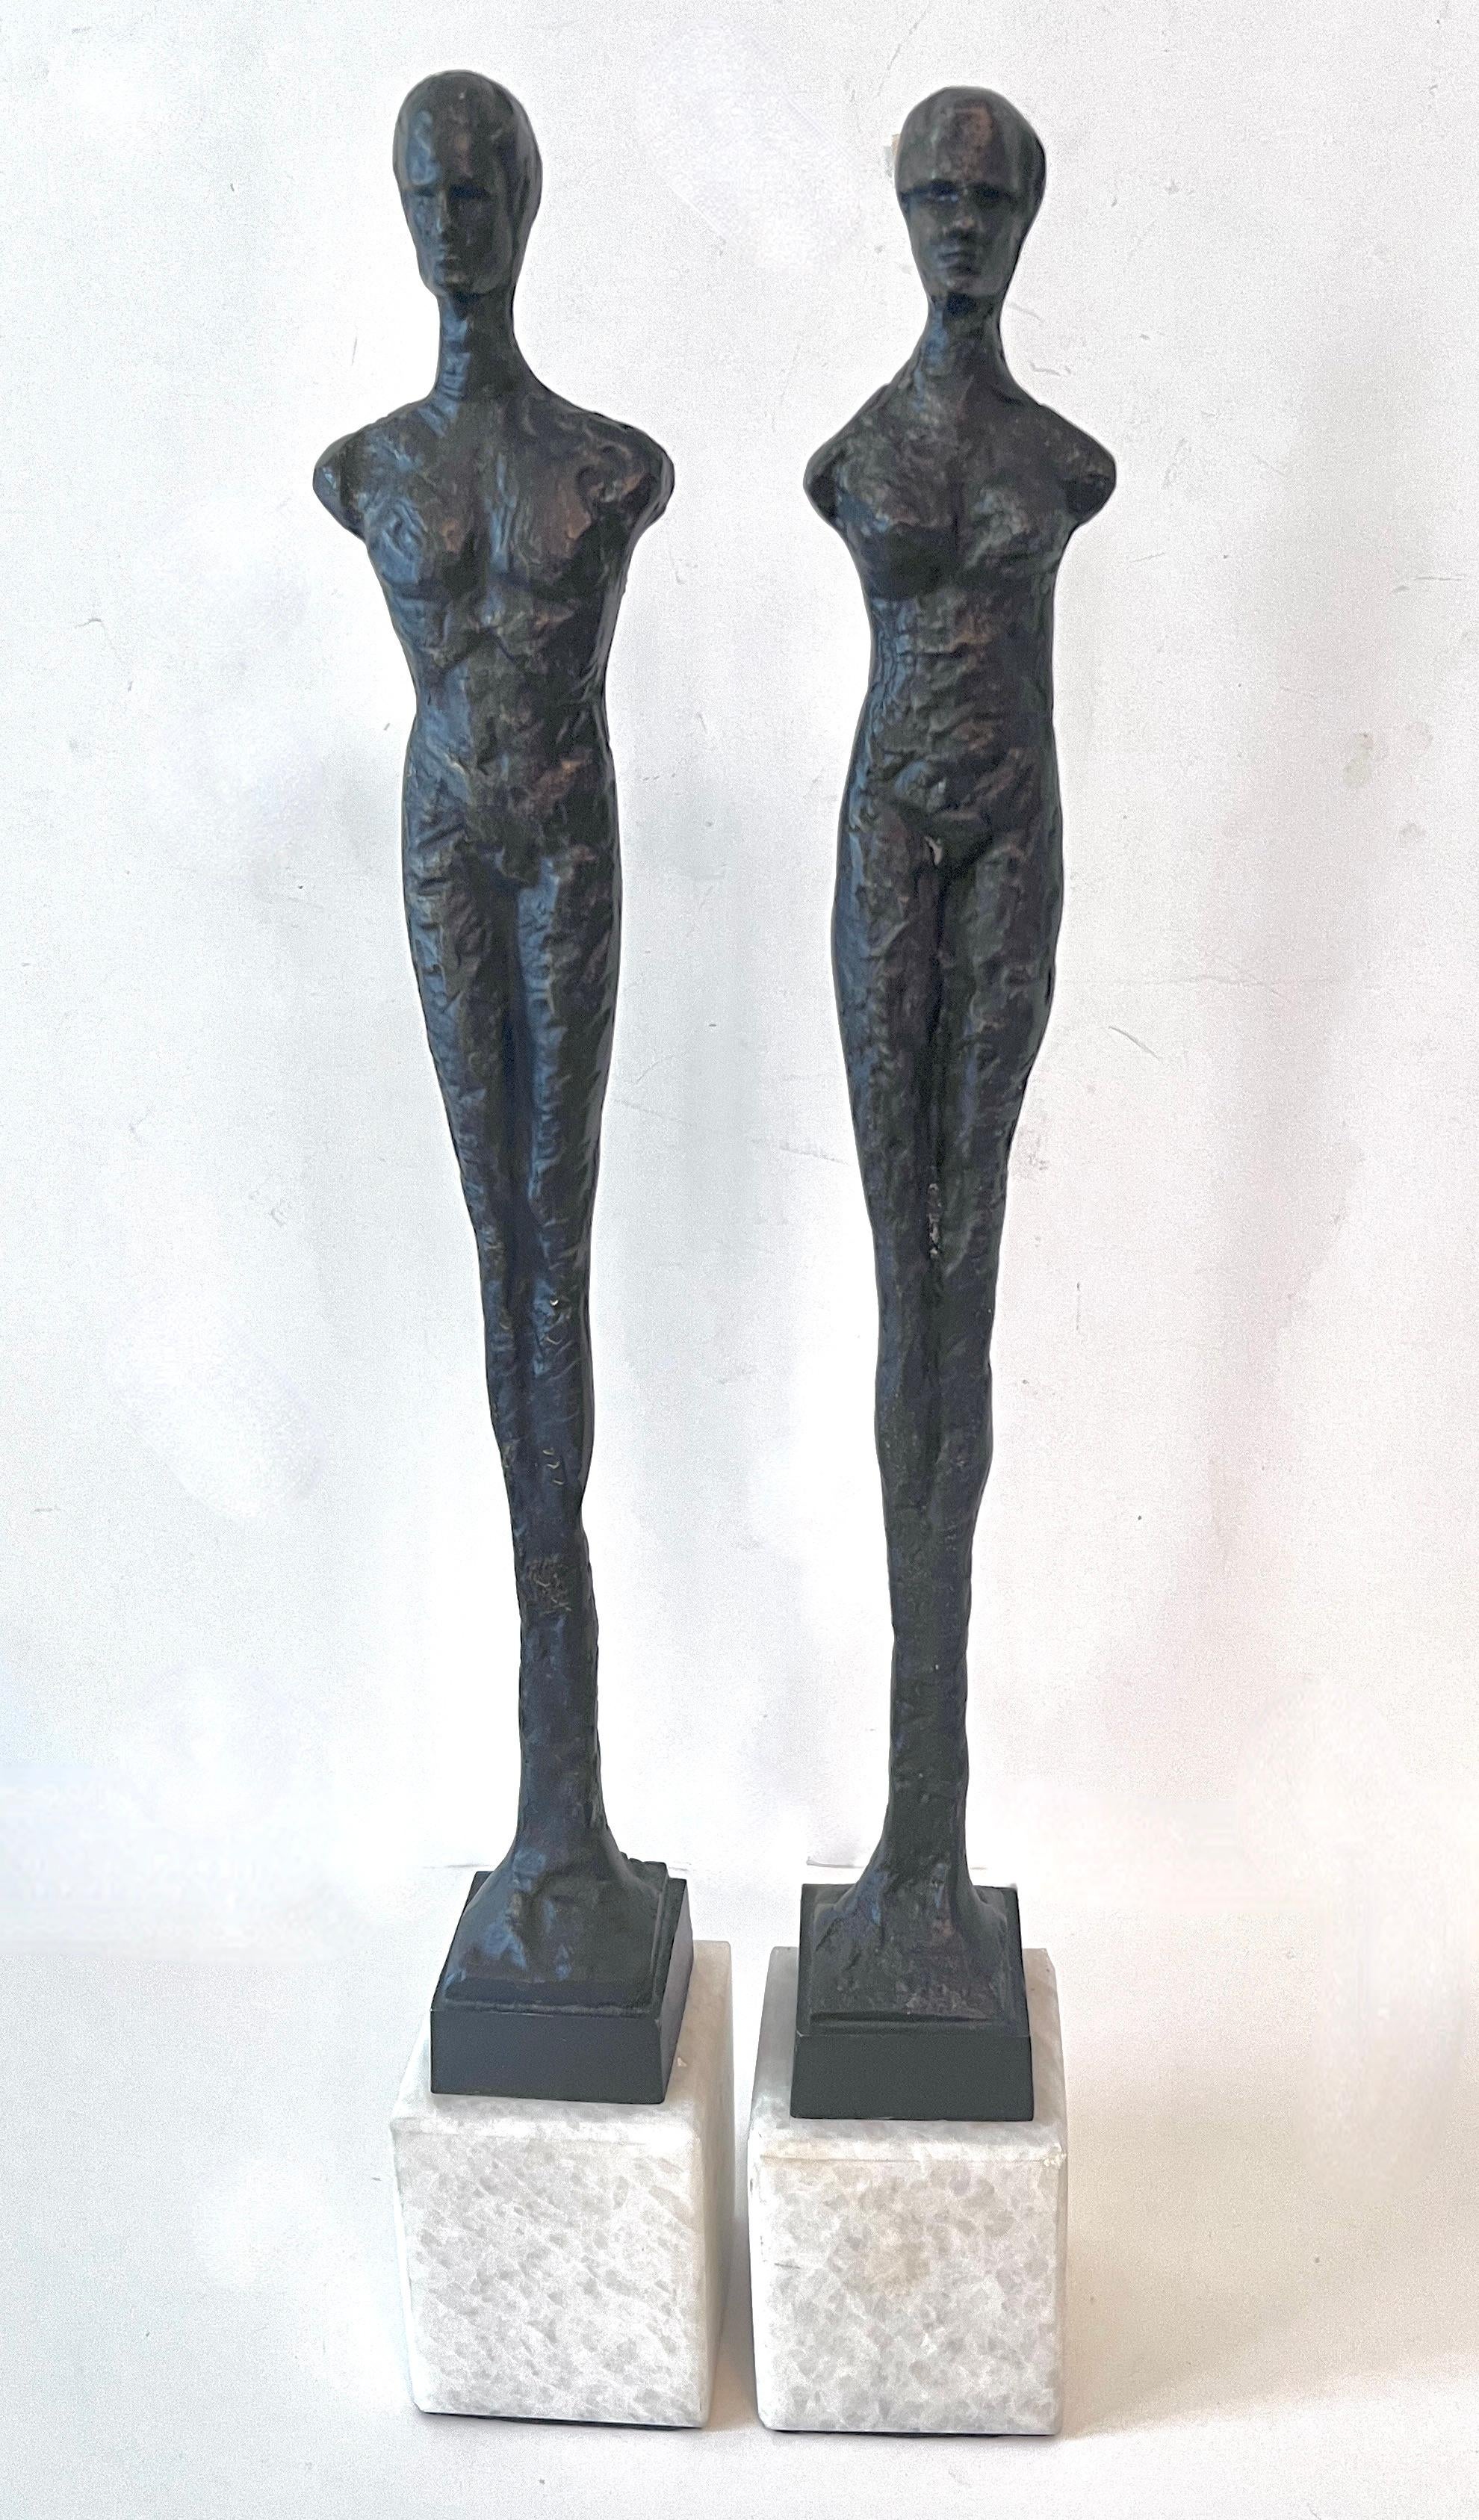 A pair of Bronze Statues in the style of Giacometti.  The pair are Male and Female figures, cast of Bronze and sit atop a White Marble base

A wonderful example of Giacometti's work and style.   A compliment to traditional or Modern space and can